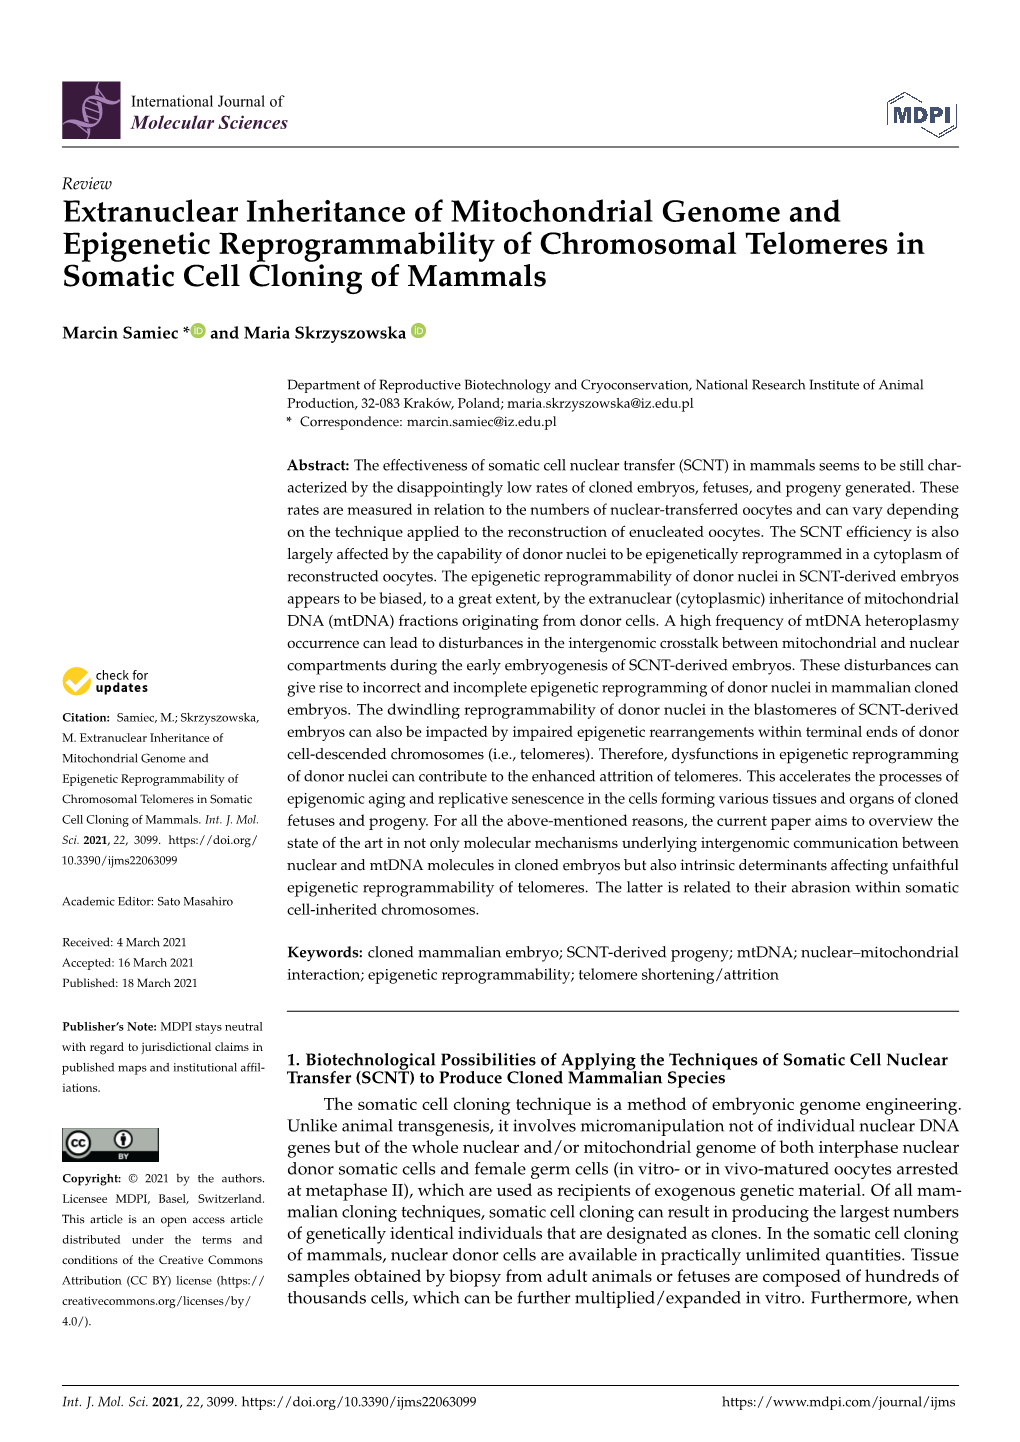 Extranuclear Inheritance of Mitochondrial Genome and Epigenetic Reprogrammability of Chromosomal Telomeres in Somatic Cell Cloning of Mammals